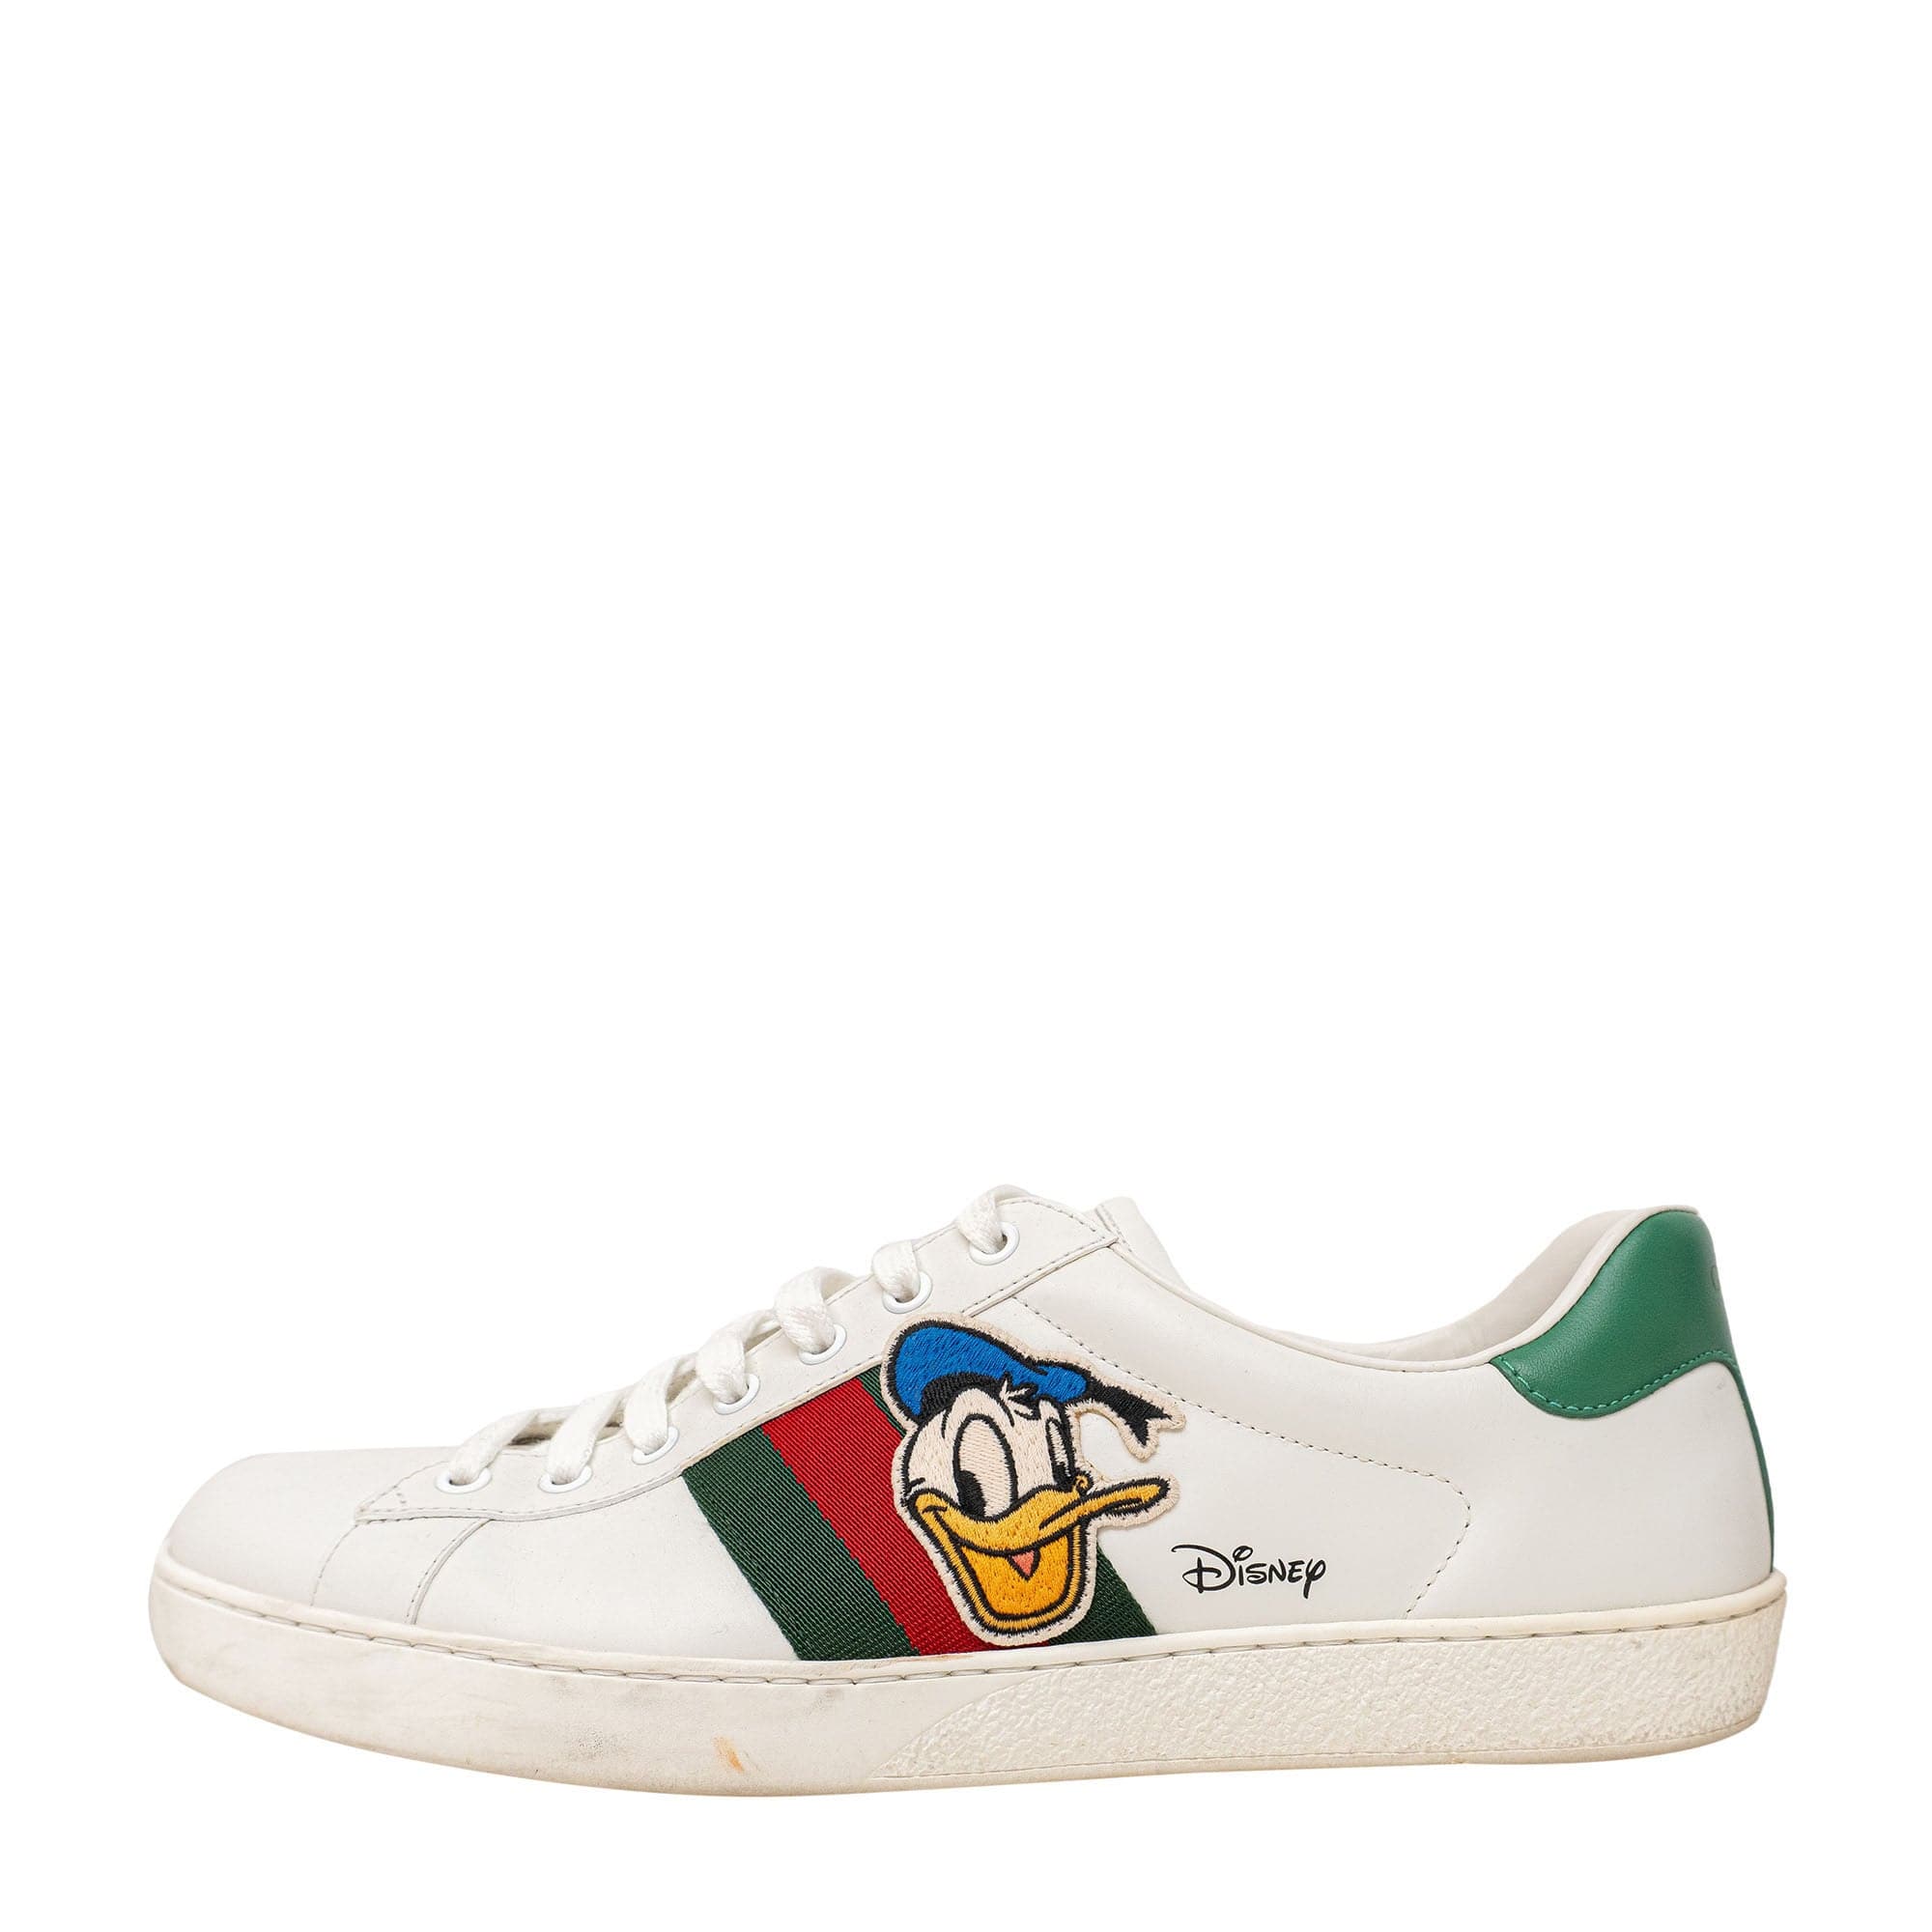 Gucci Gucci X Disney Donald Duck Ace Sneakers 44 SYCH157